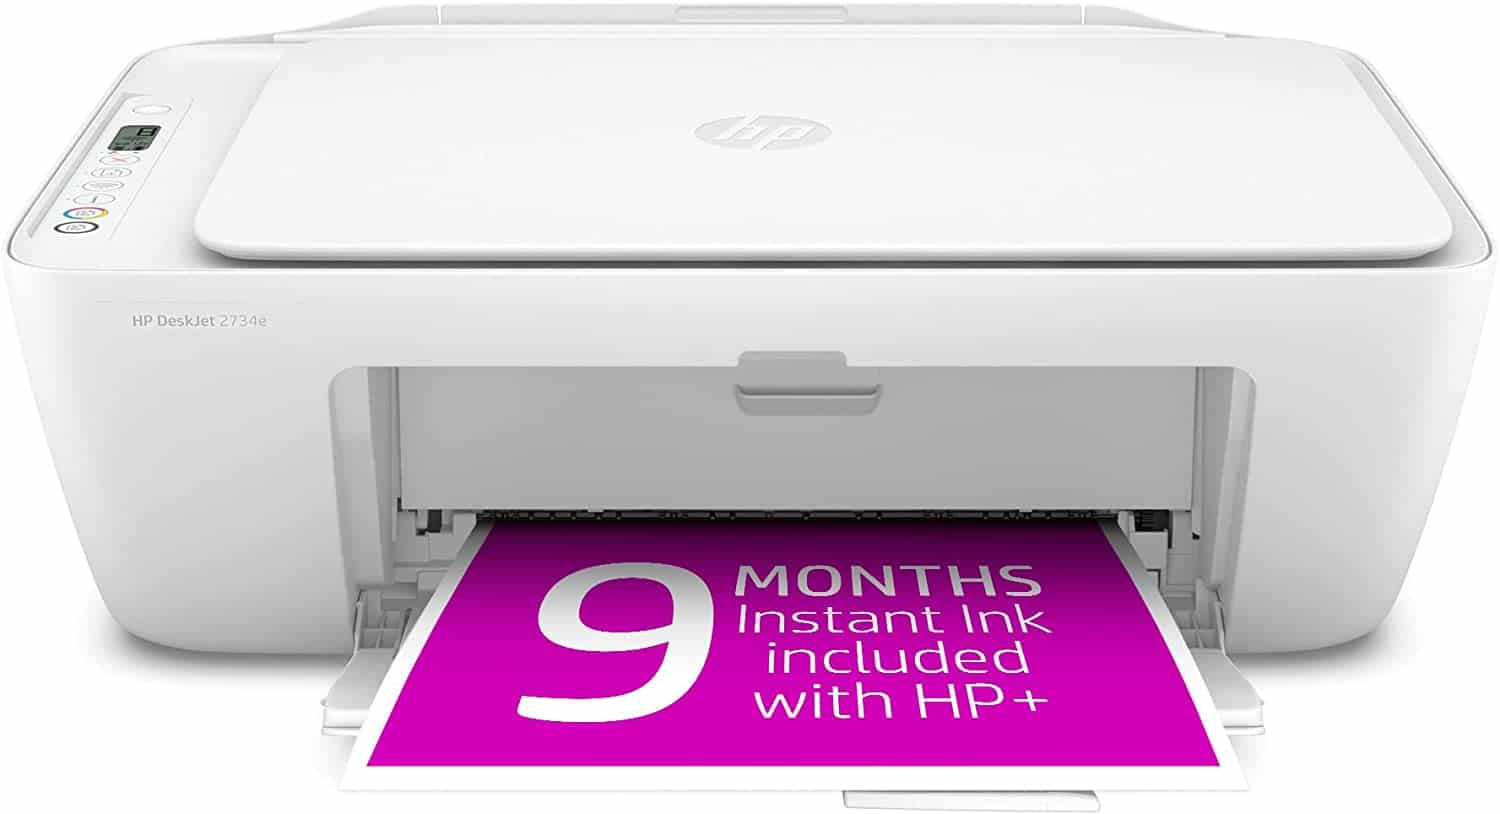 Black Friday Deals – HP DeskJet 2734e Wireless Color All-in-One Printer – 47% off only at Amazon